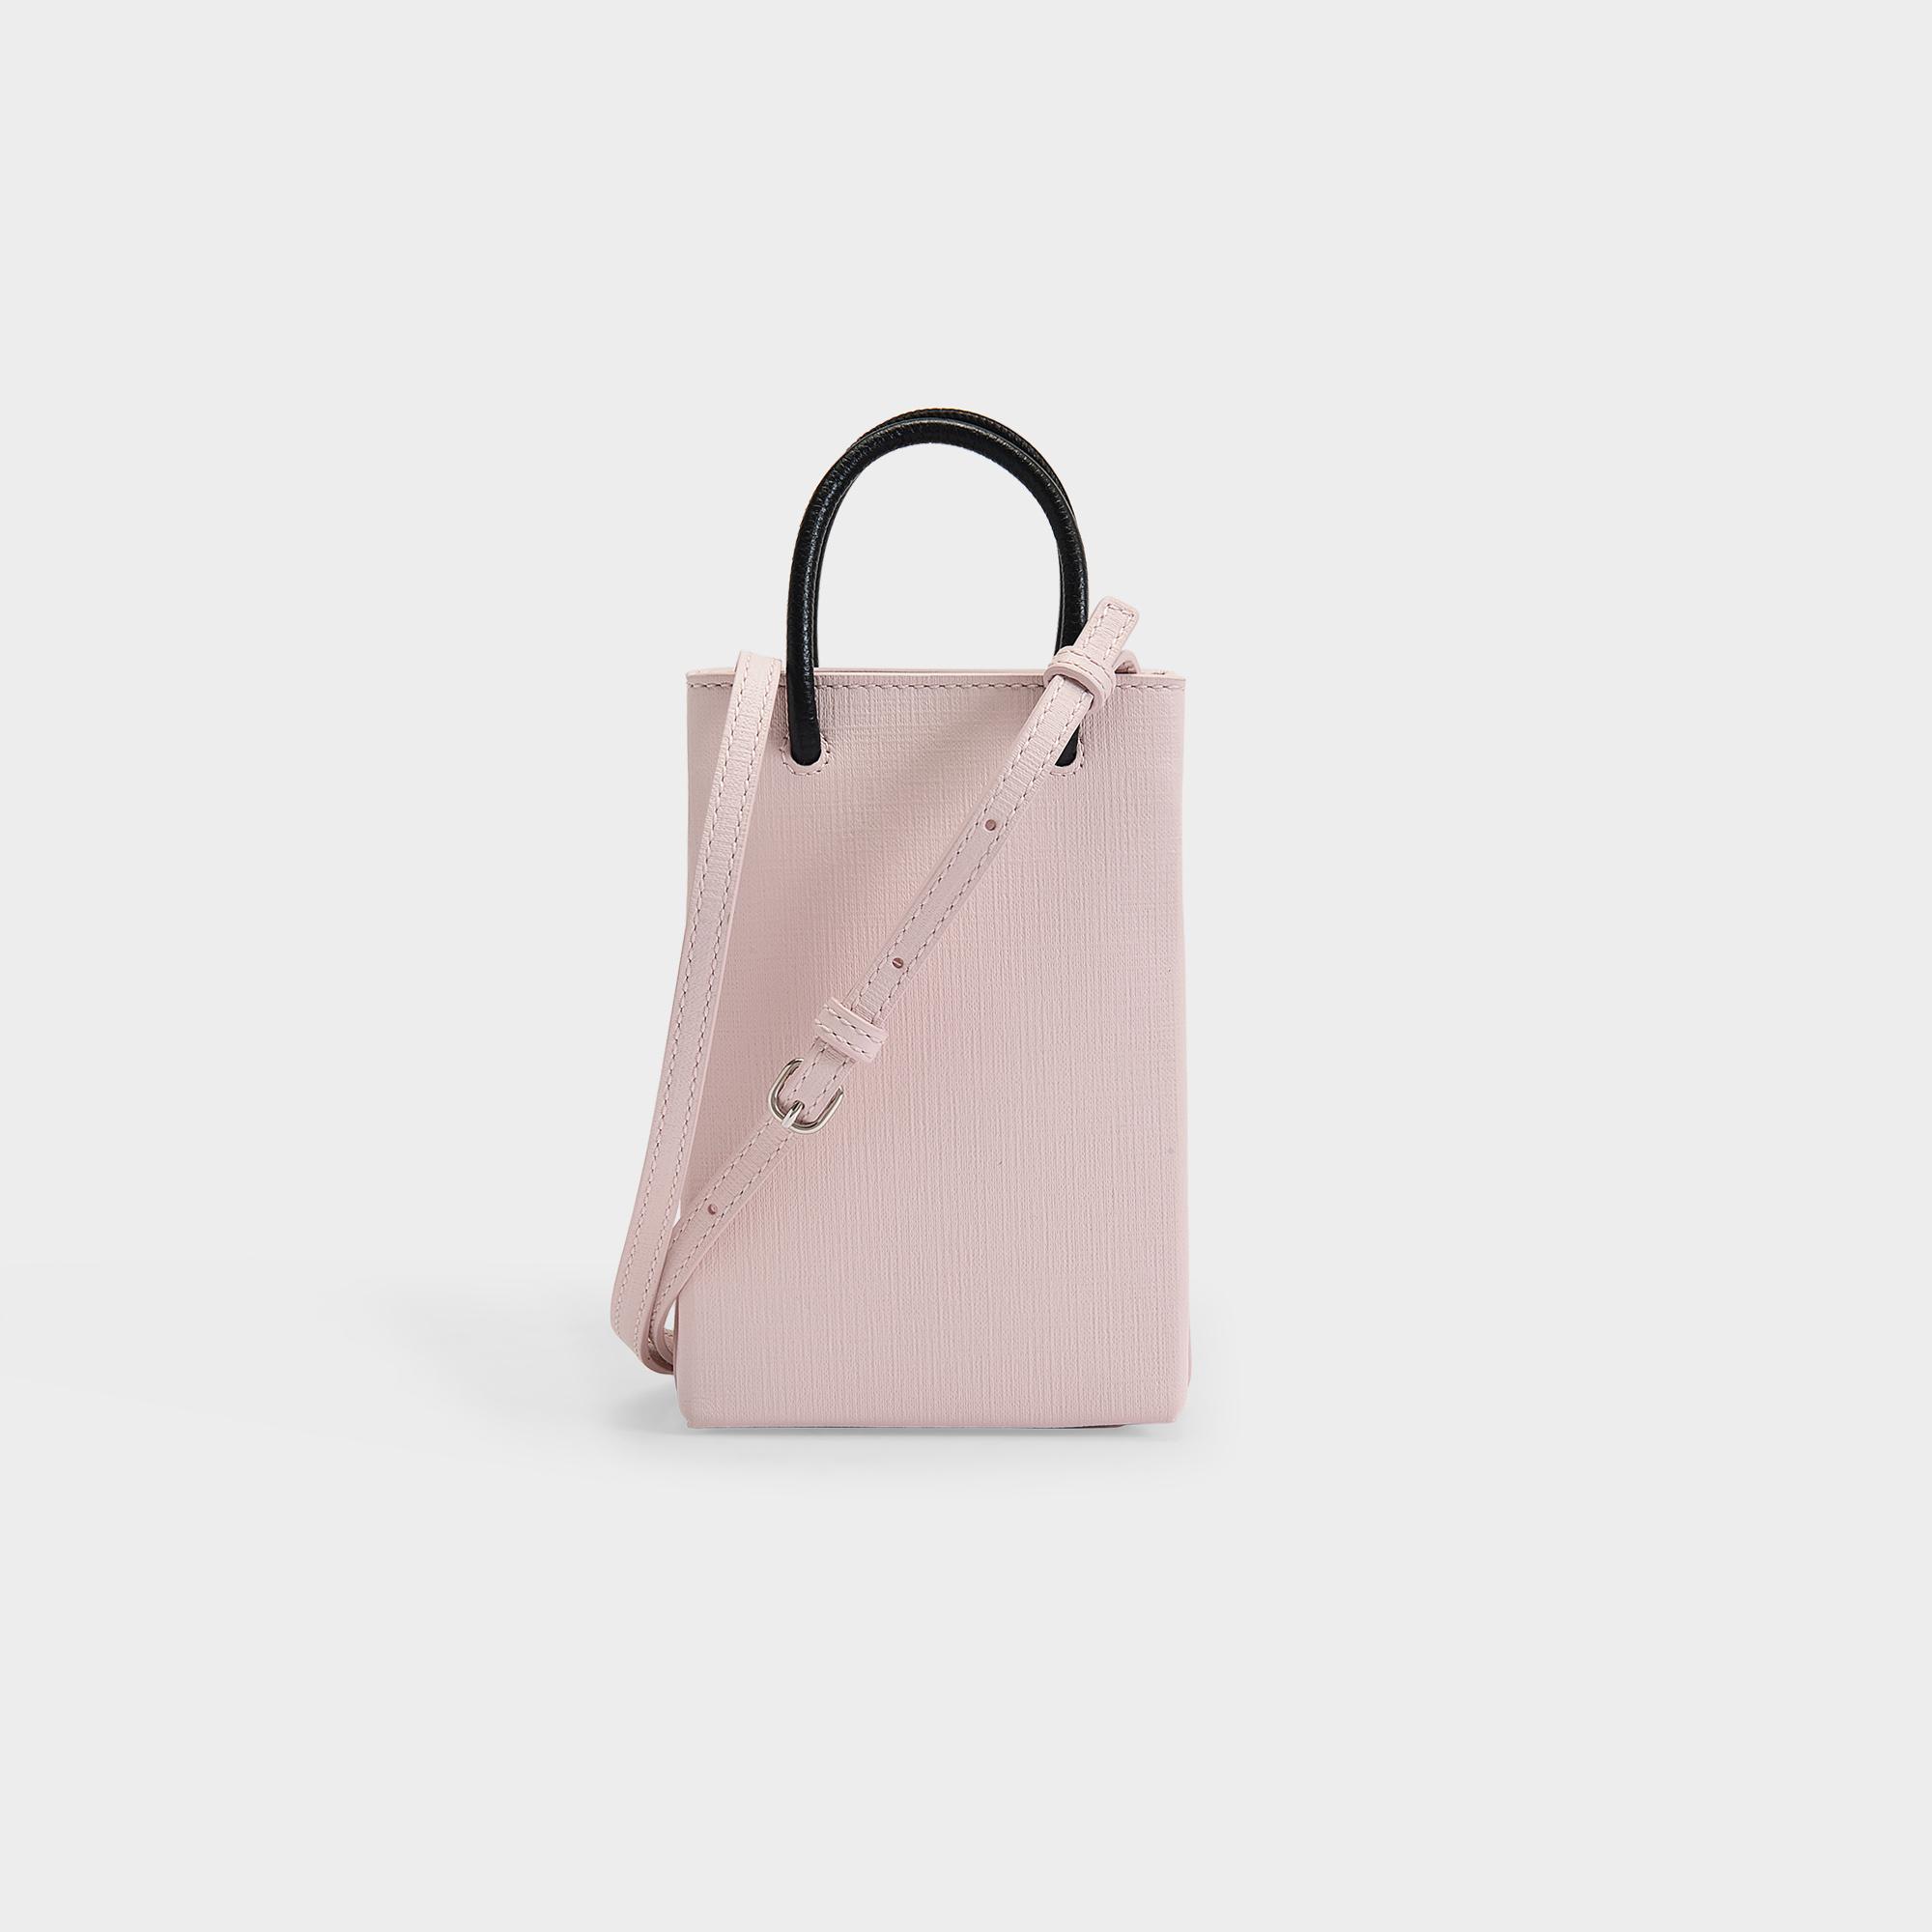 Balenciaga Phone Holder Shopping Bag In Light Rose Leather in Pink 